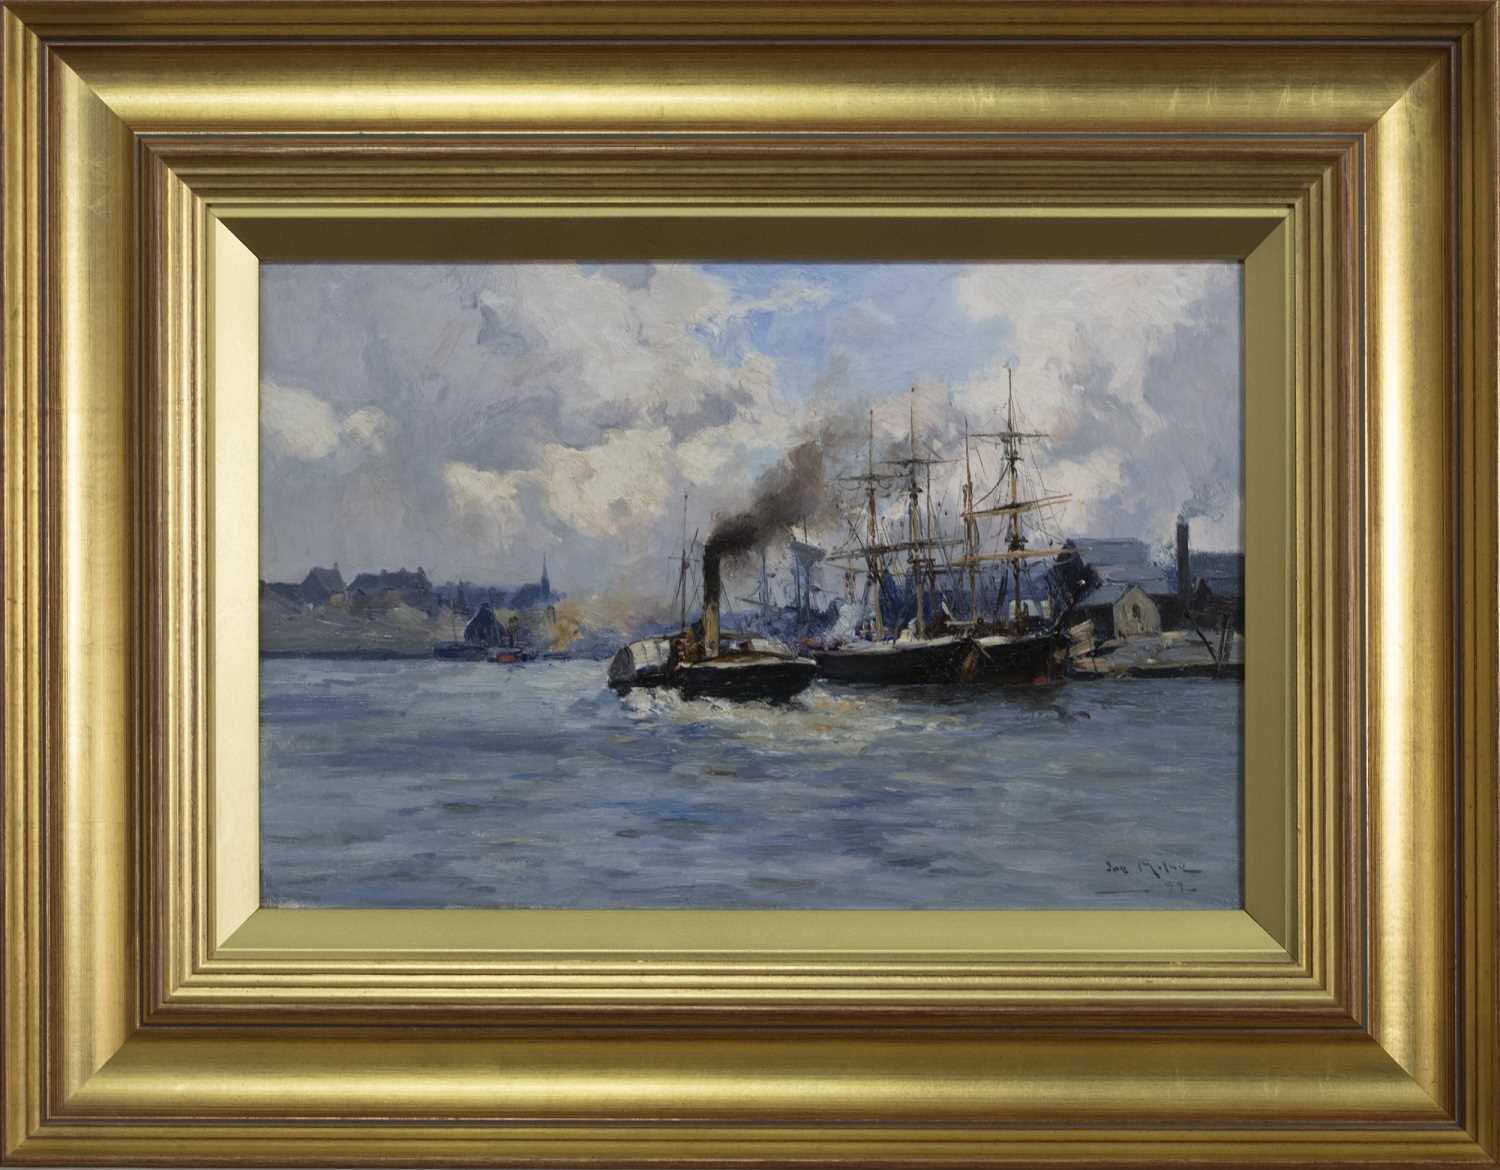 Lot 2045 - STEAM AND SAIL AT A SCOTTISH QUAYSIDE, AN OIL BY JOE MILNE